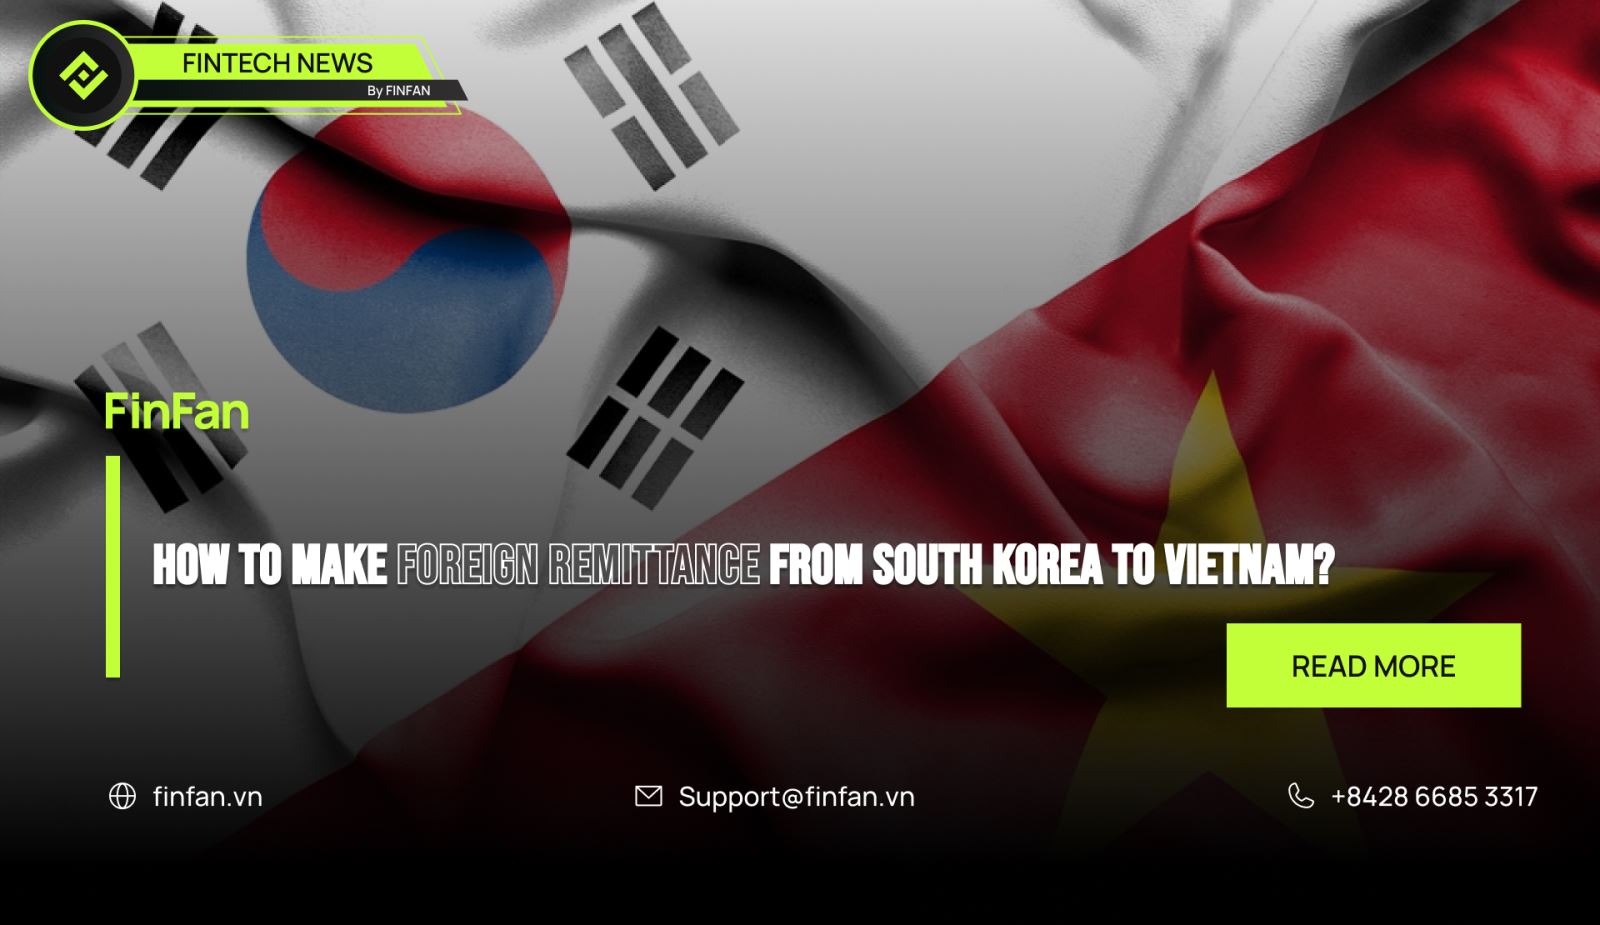 How to make foreign remittance from South Korea to Vietnam?